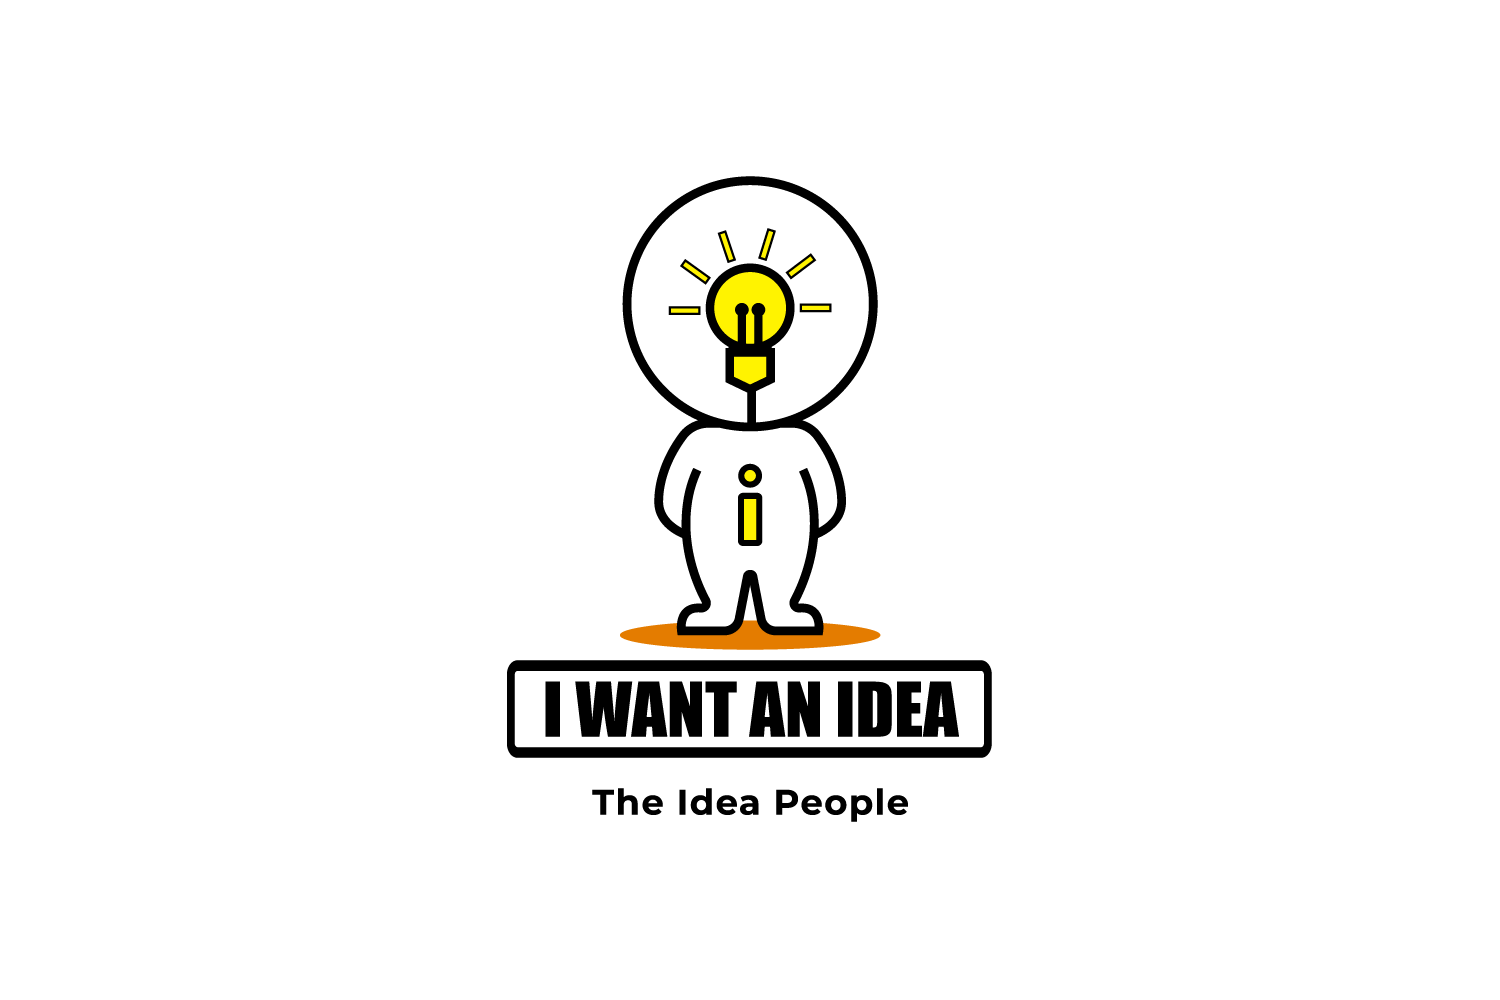 I Want An Idea - PR, marketing and social media ideas for your business.